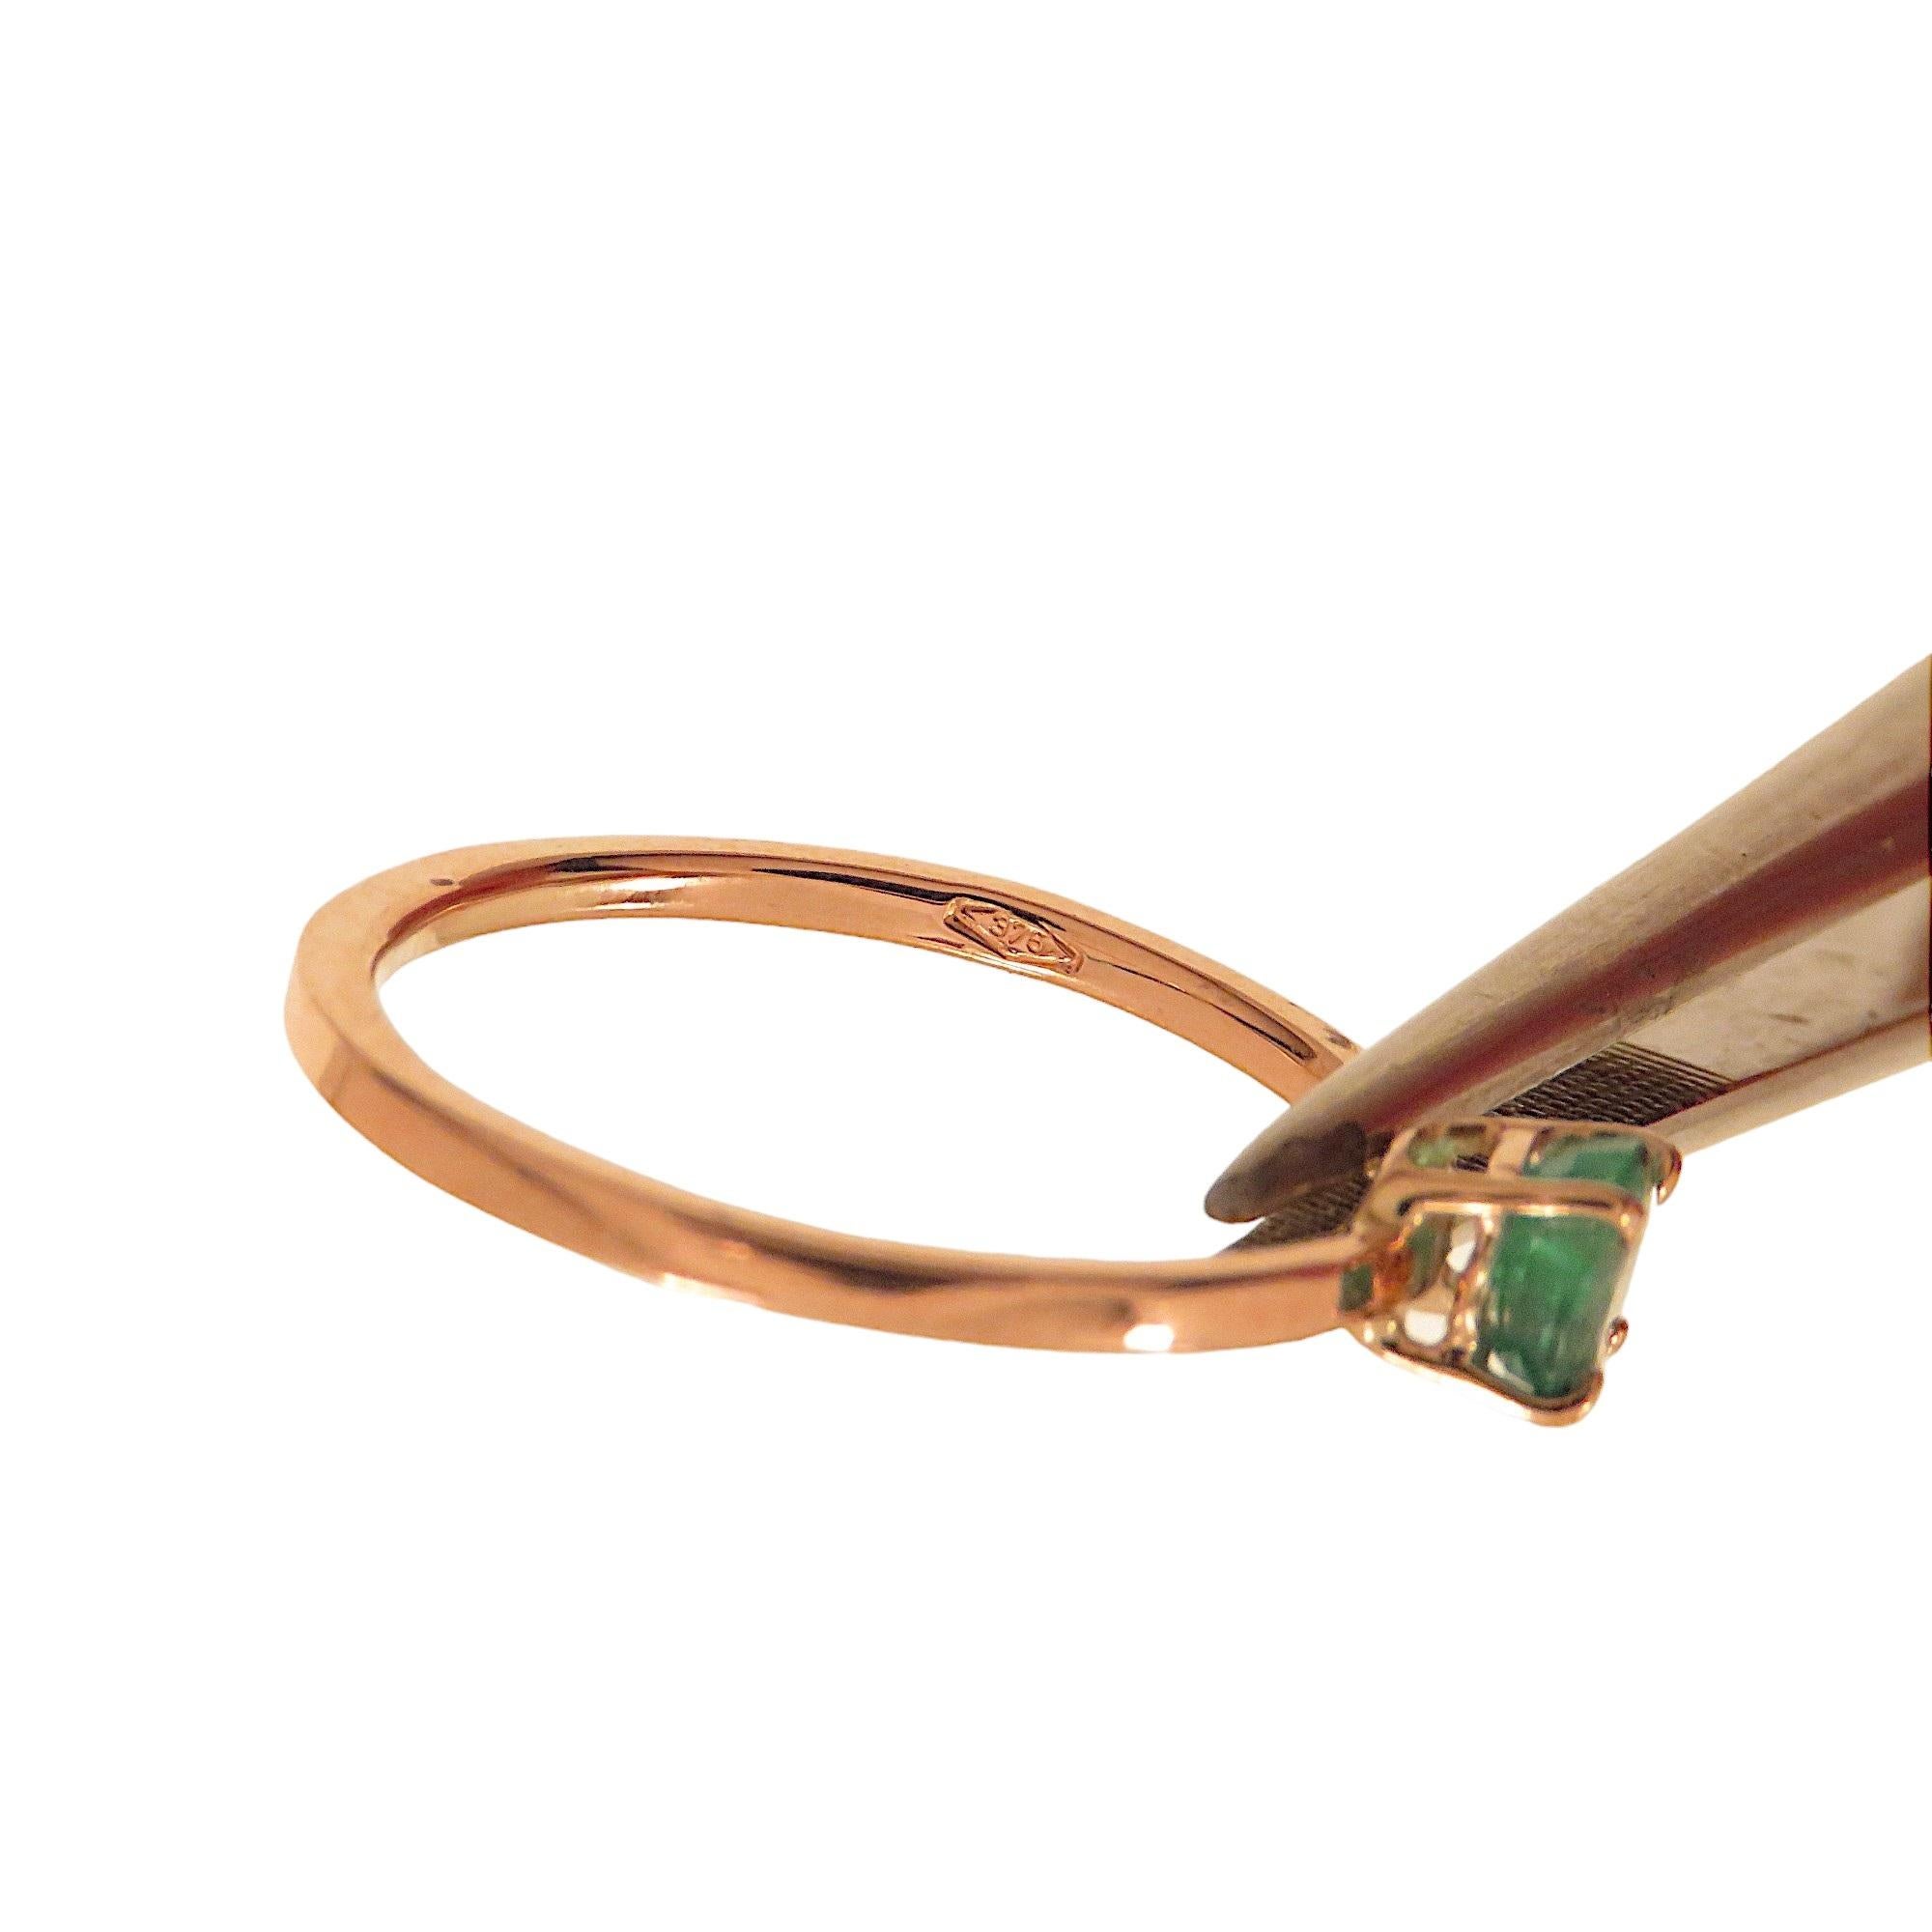 Botta jewelry rose gold emerald ring made in Italy For Sale 2